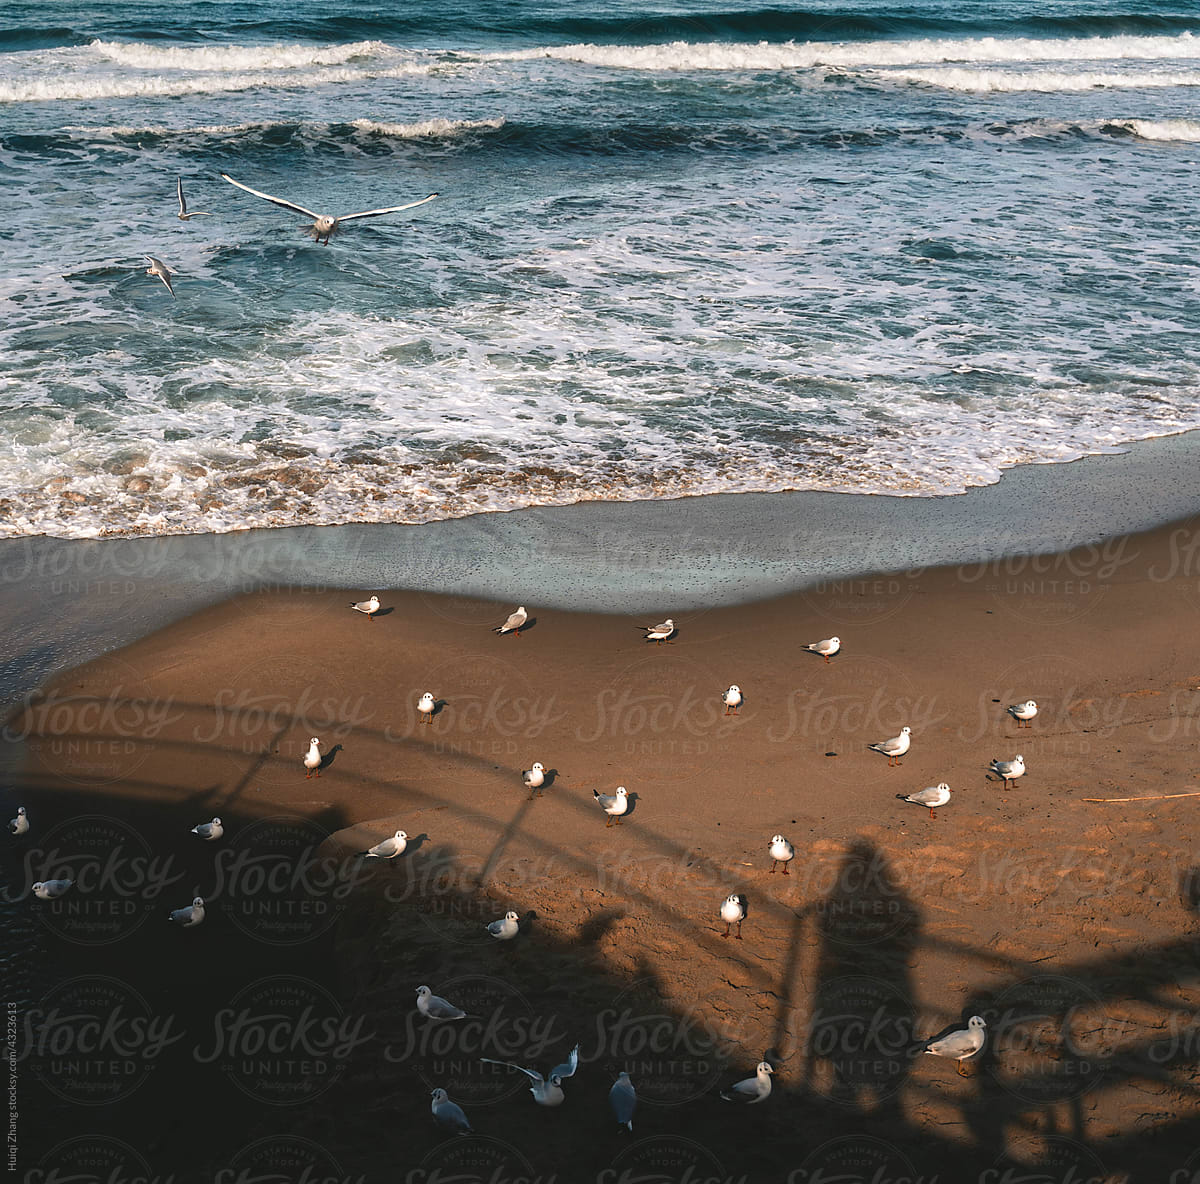 Pigeons on the beach before sunset in Cefalù